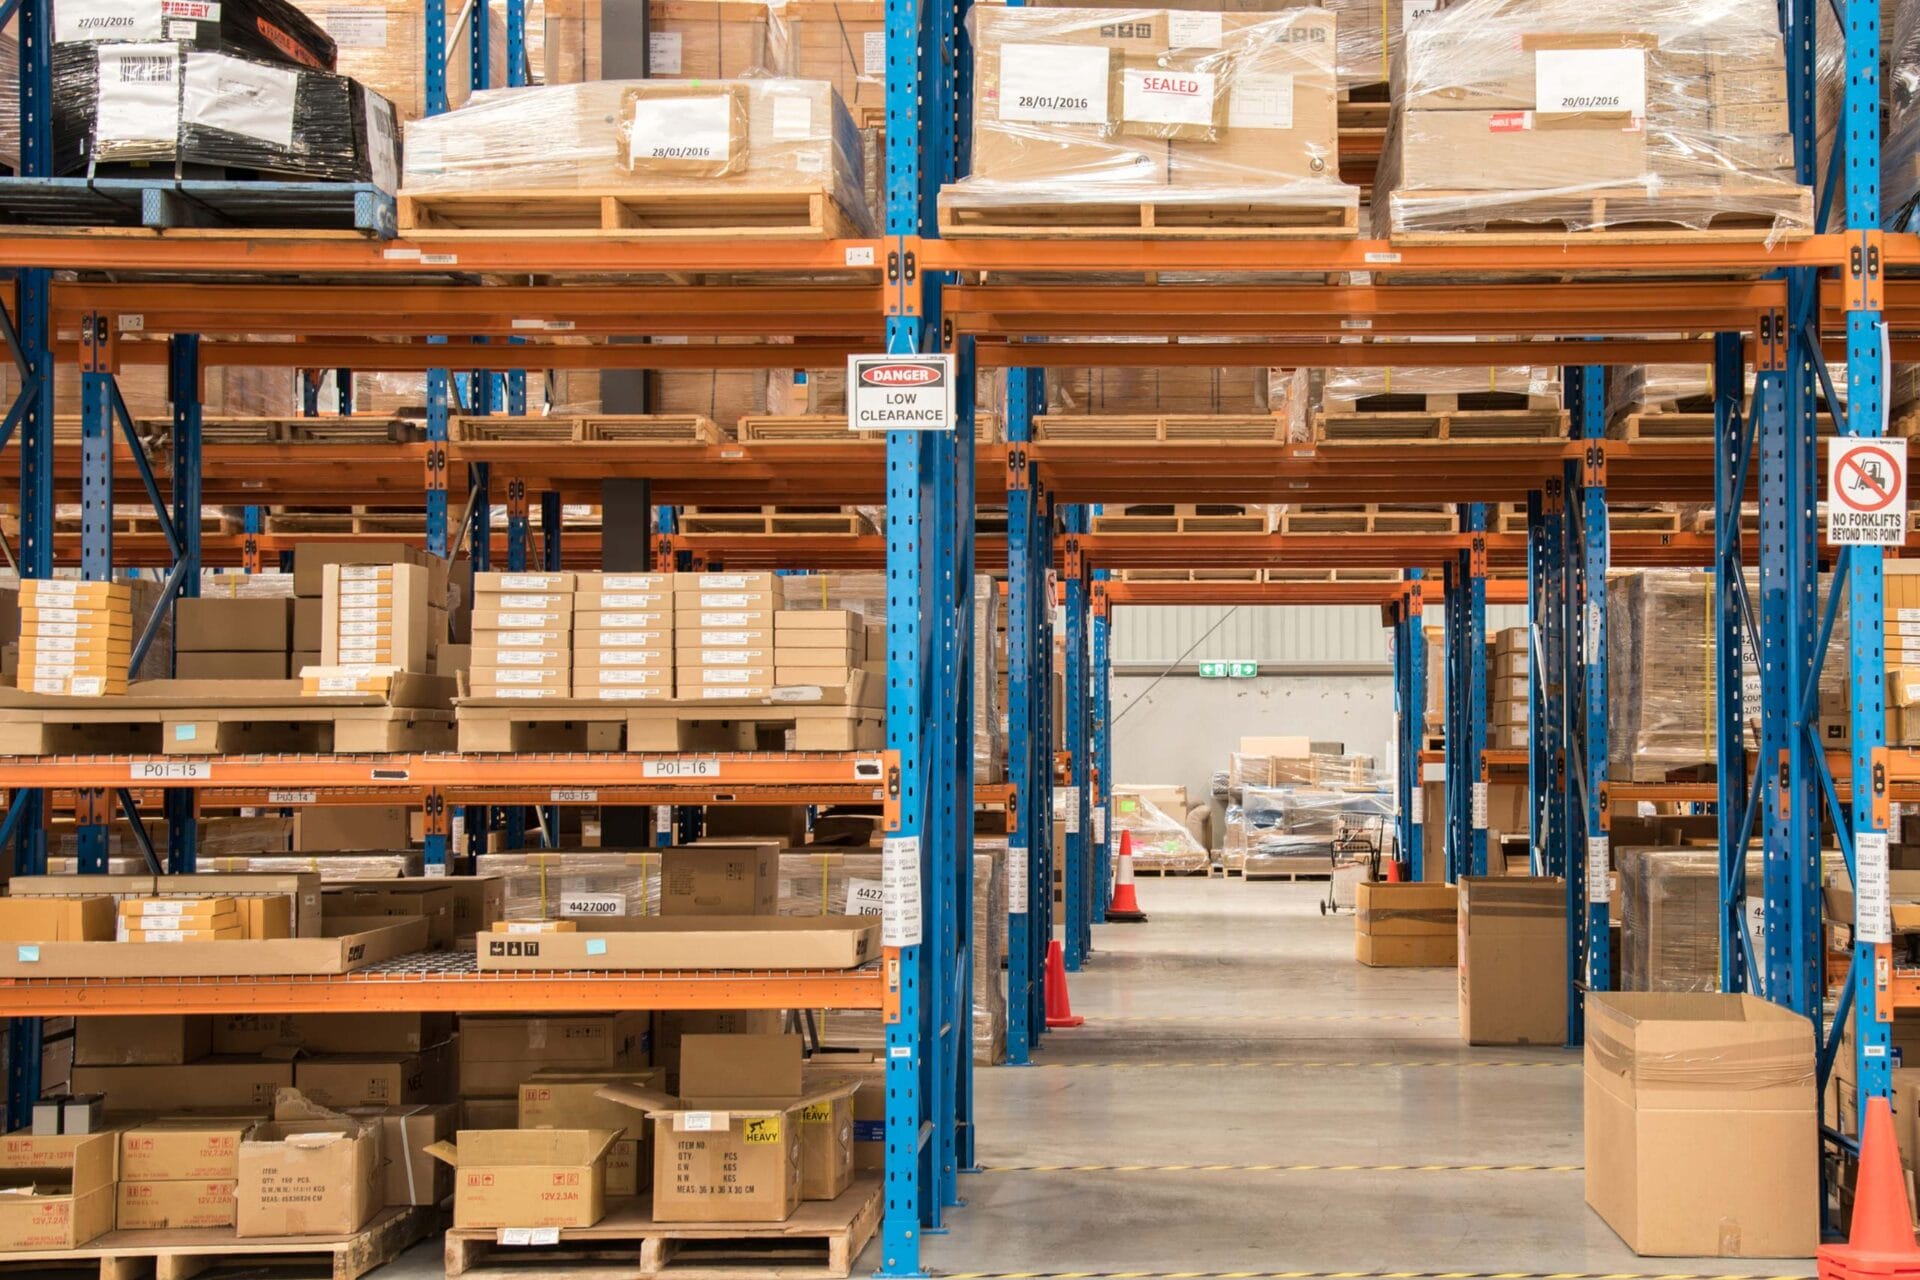 Discover how supply chain compliance can help you overcome Amazon's regulatory challenges and ensure seamless operations.